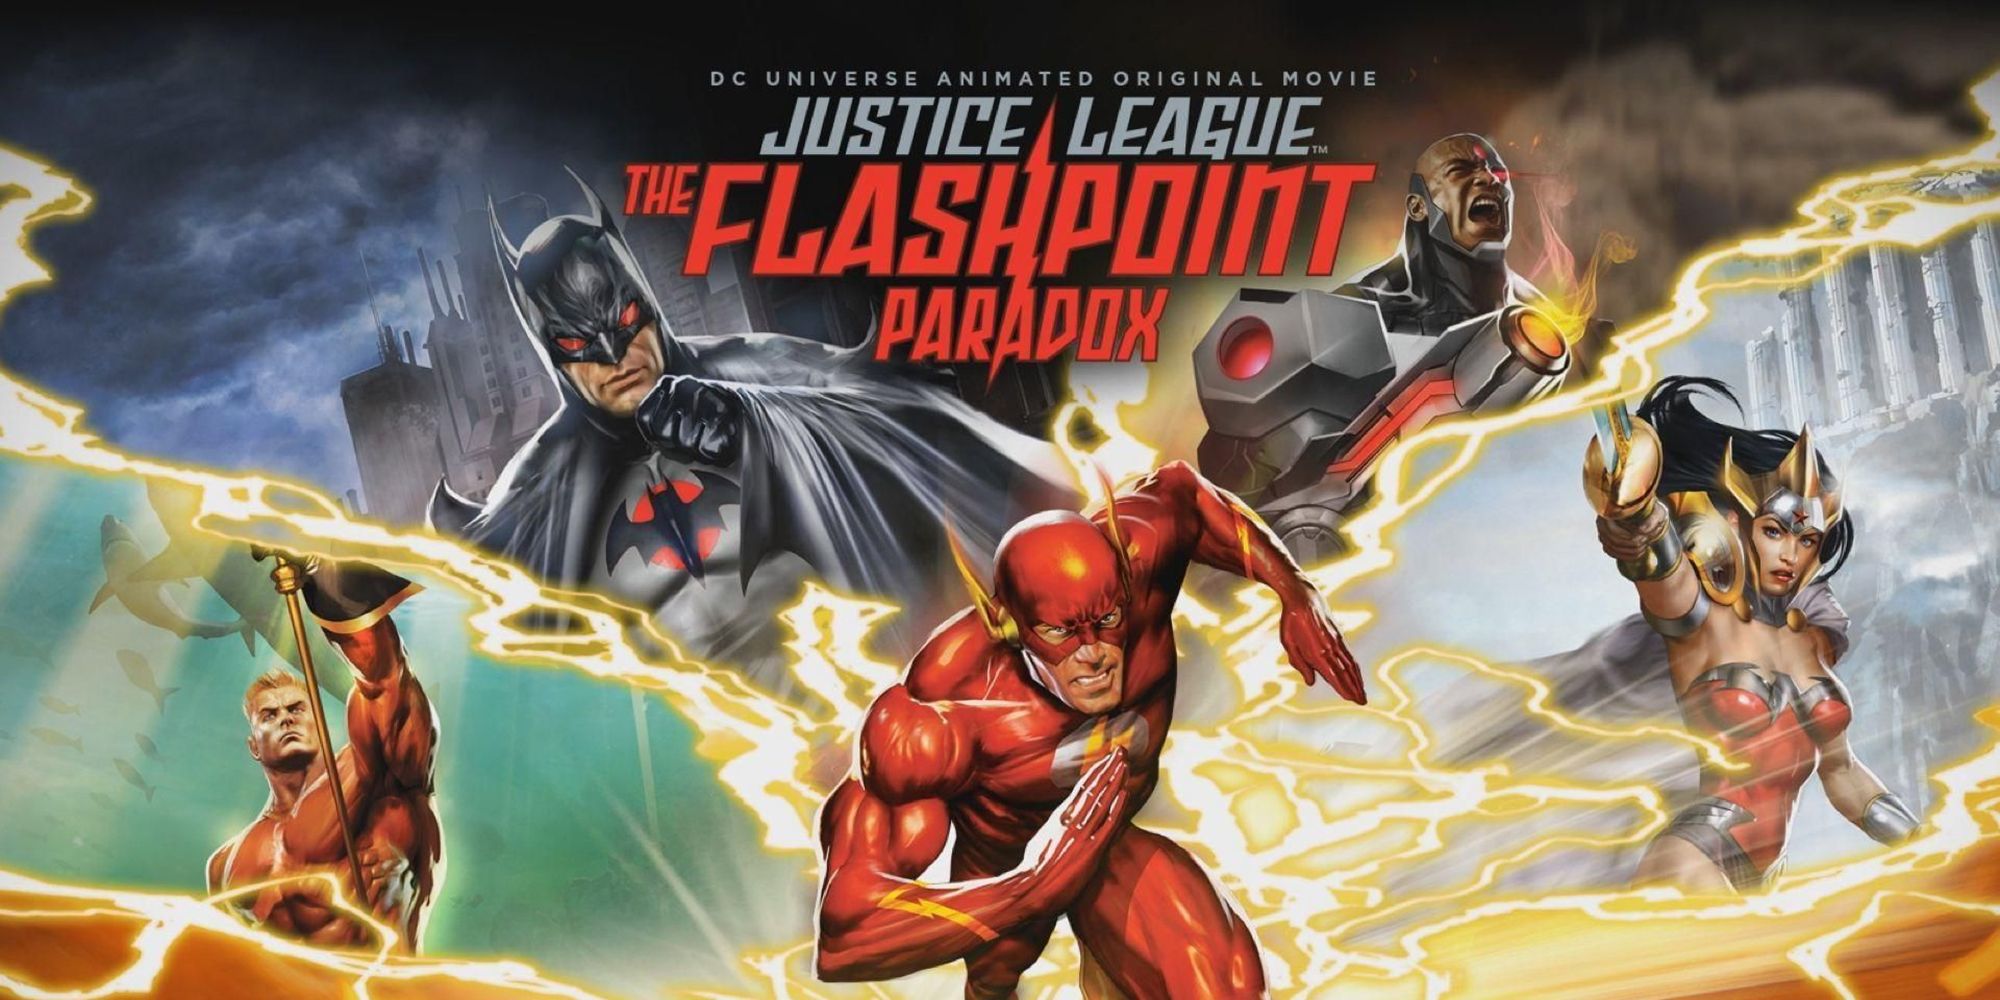 The Flashpoint Paradox (2013)